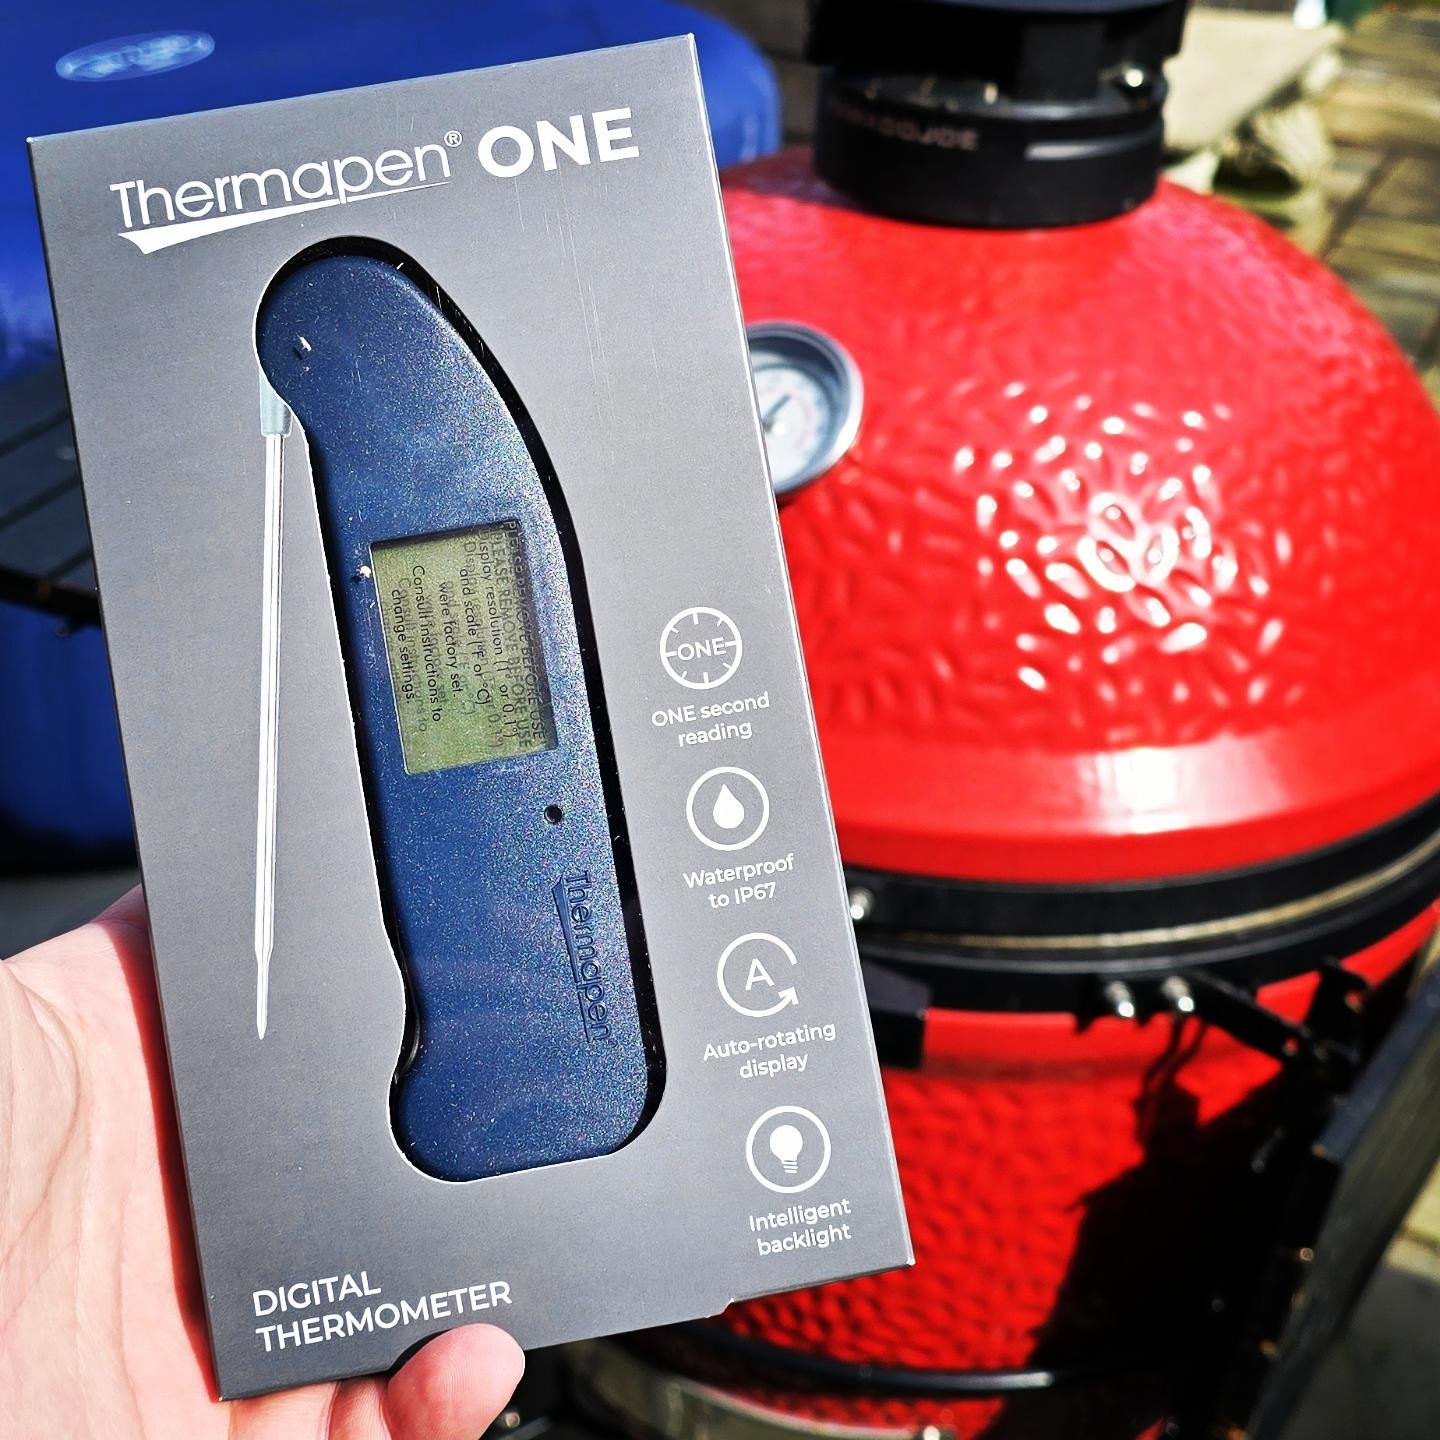 Those who know me will know that I swear by my thermapen, it's the number 1 item on my list of top five accessories to up your barbecue game. 

Yes, there are cheaper options out there.  But they don't come with a calibration certificate, a temp read